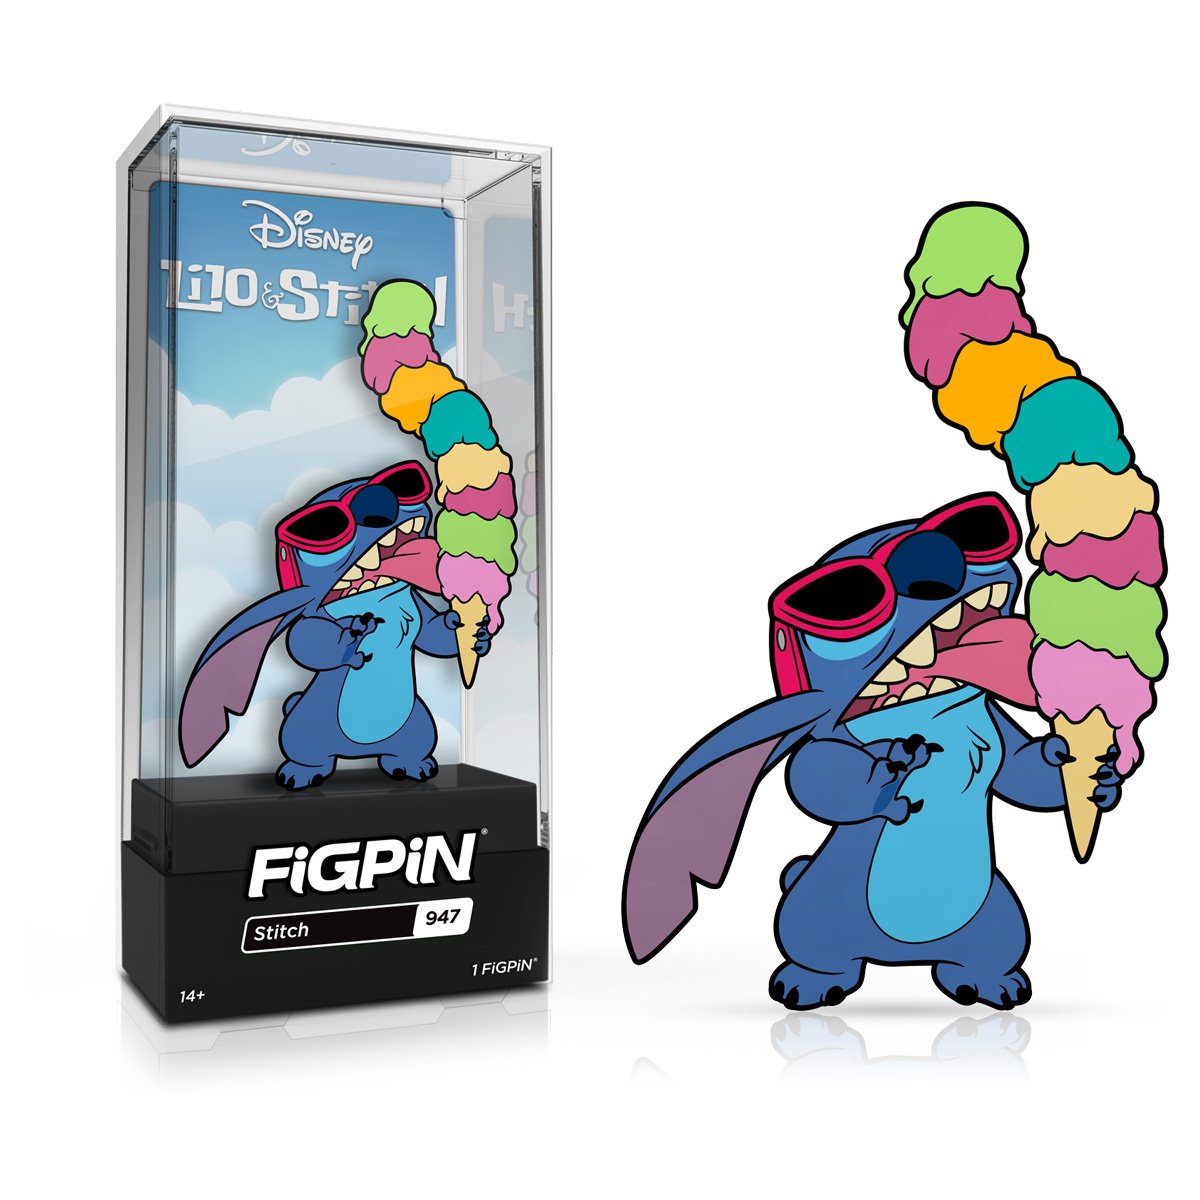 Disney Lilo & Stitch Ice Cream WDW Parks Pin Trading for Sale in